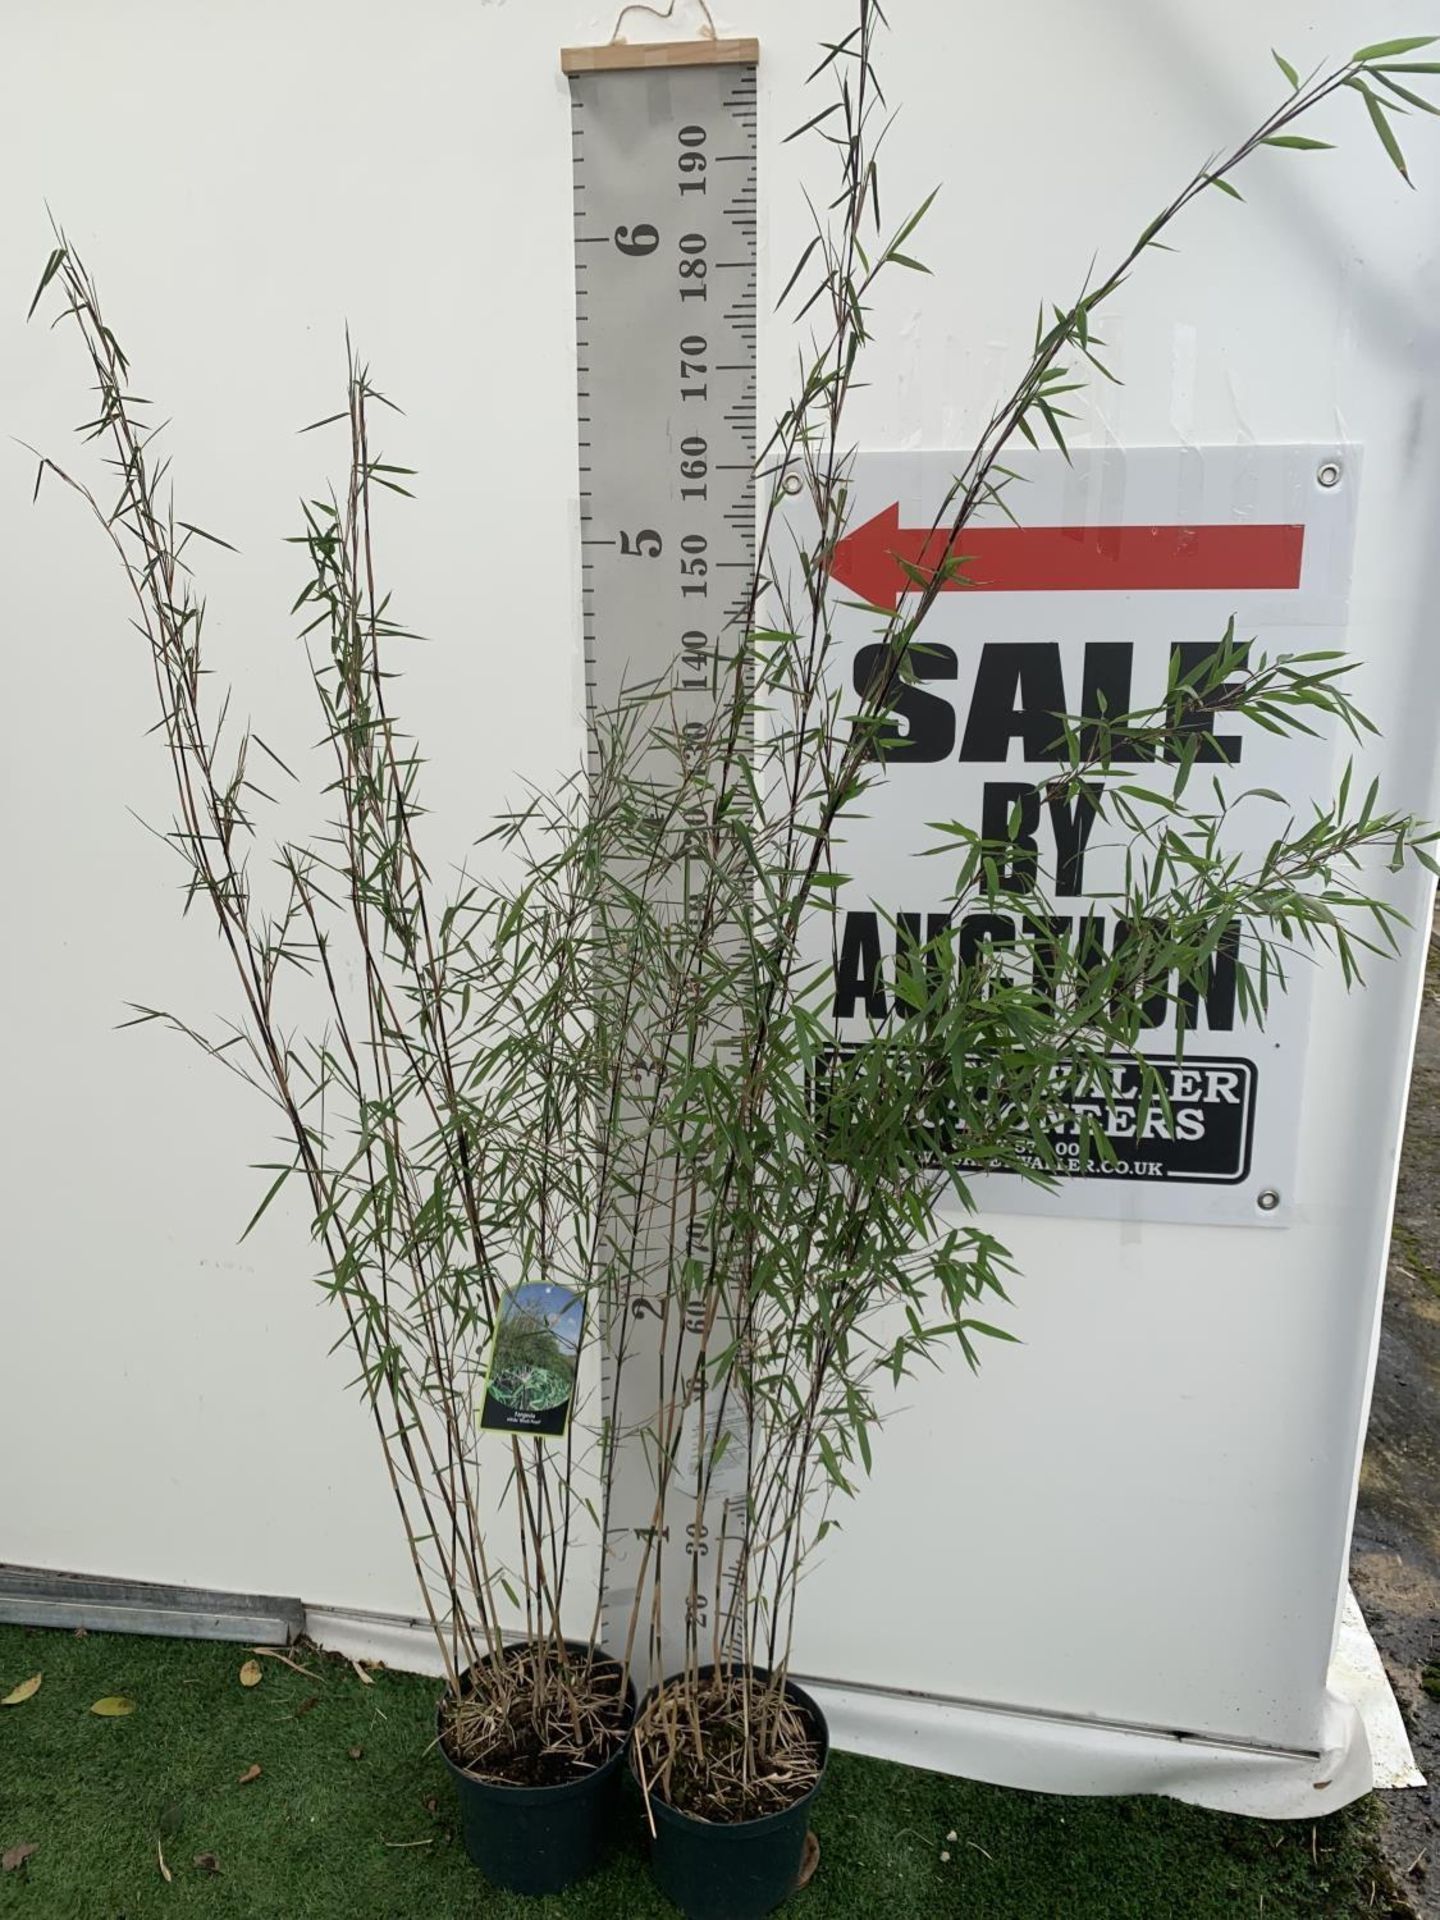 TWO BAMBOO FARGESIA NITIDA 'BLACK PEARL' APPROX 190CM IN HEIGHT IN 5 LTR POTS PLUS VAT TO BE SOLD - Image 4 of 10